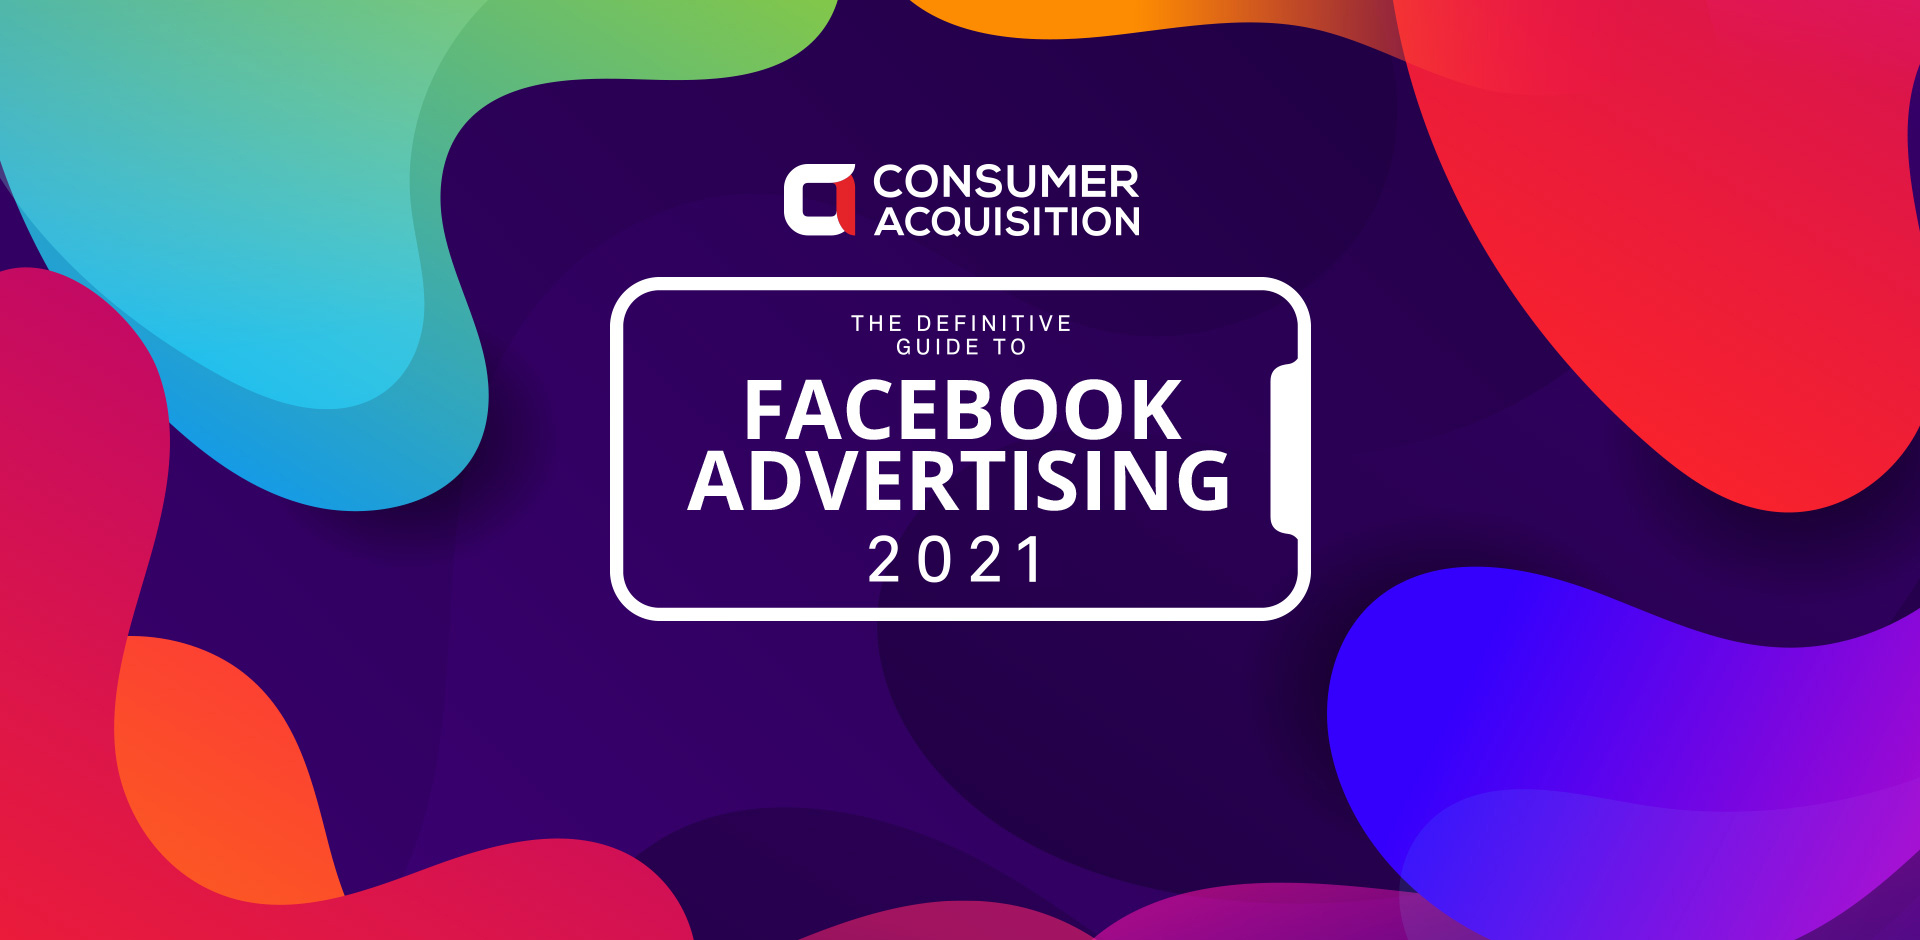 The Definitive Guide to Facebook Advertising in 2021